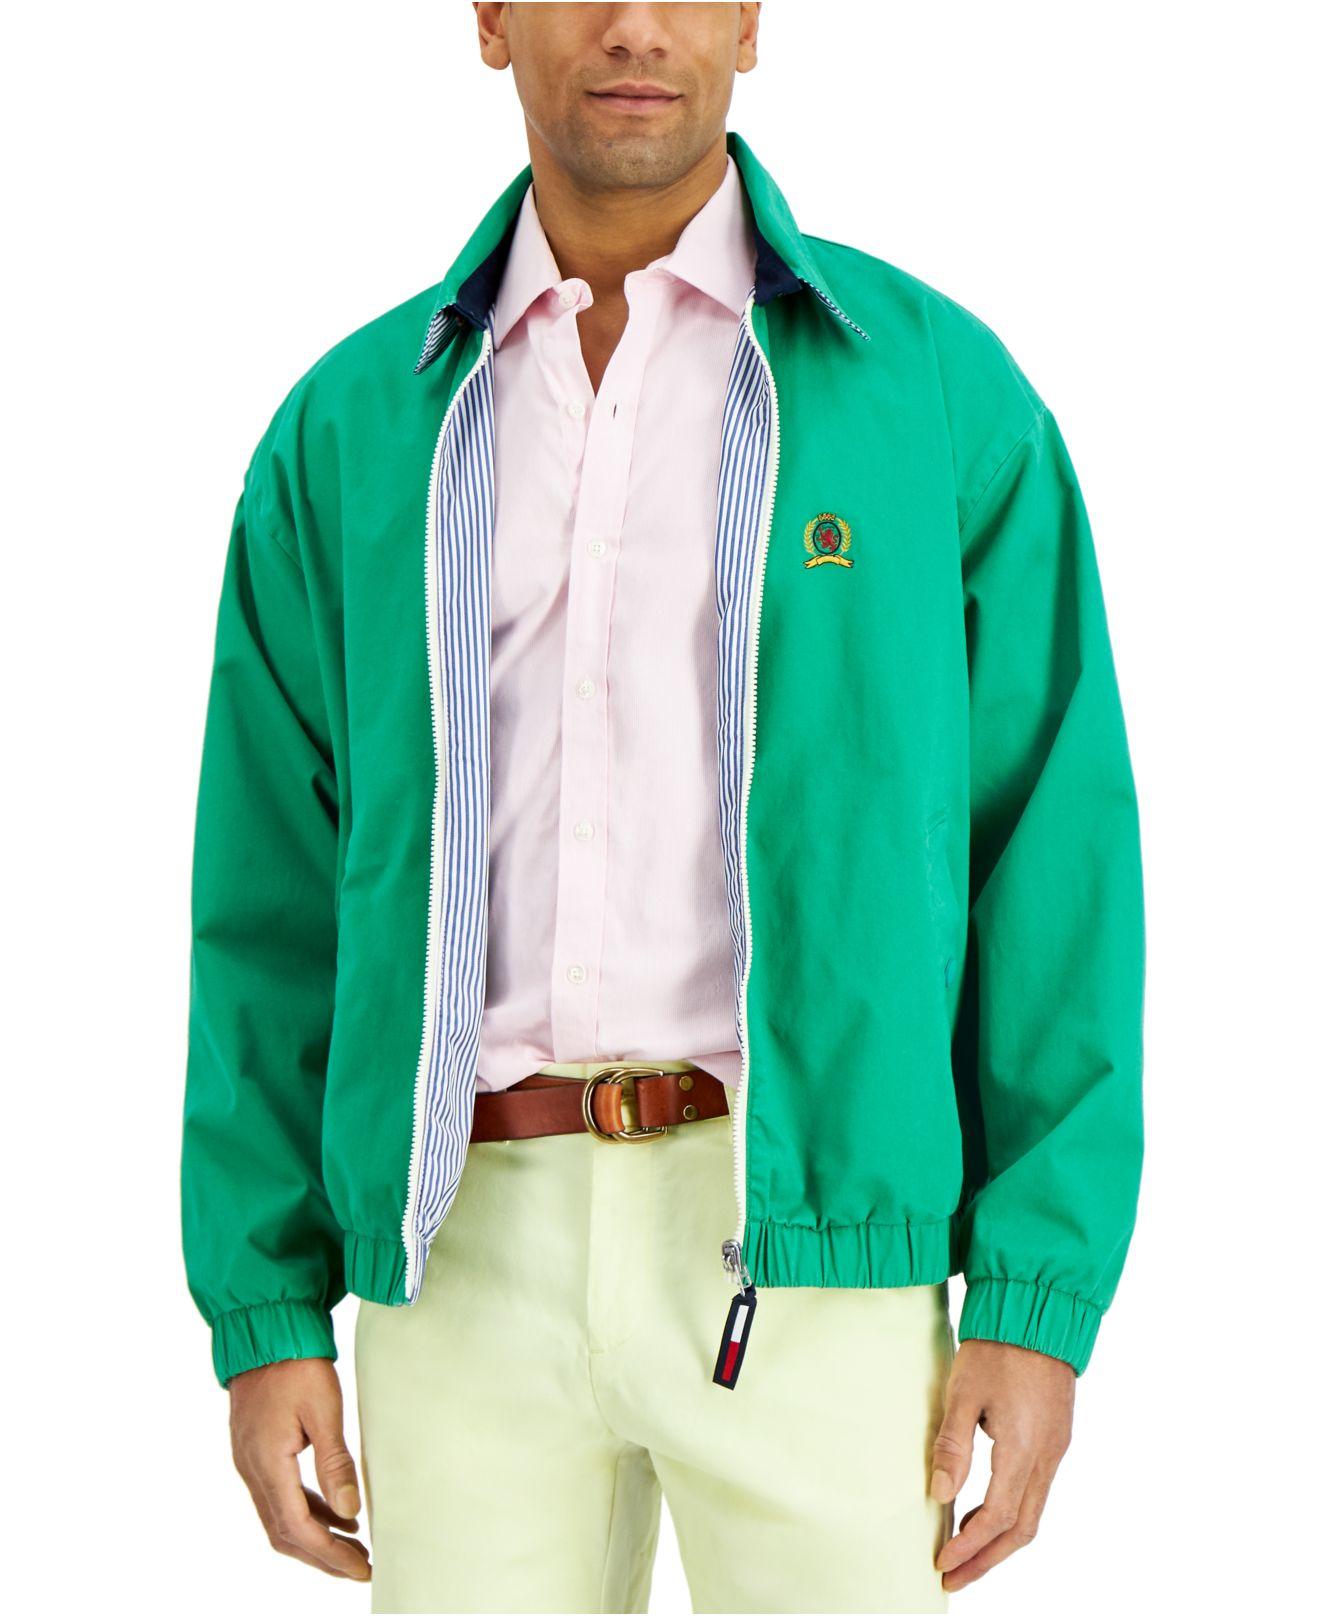 Tommy Hilfiger Cotton Washed Reversible Ivy Jacket in Green for Men - Lyst